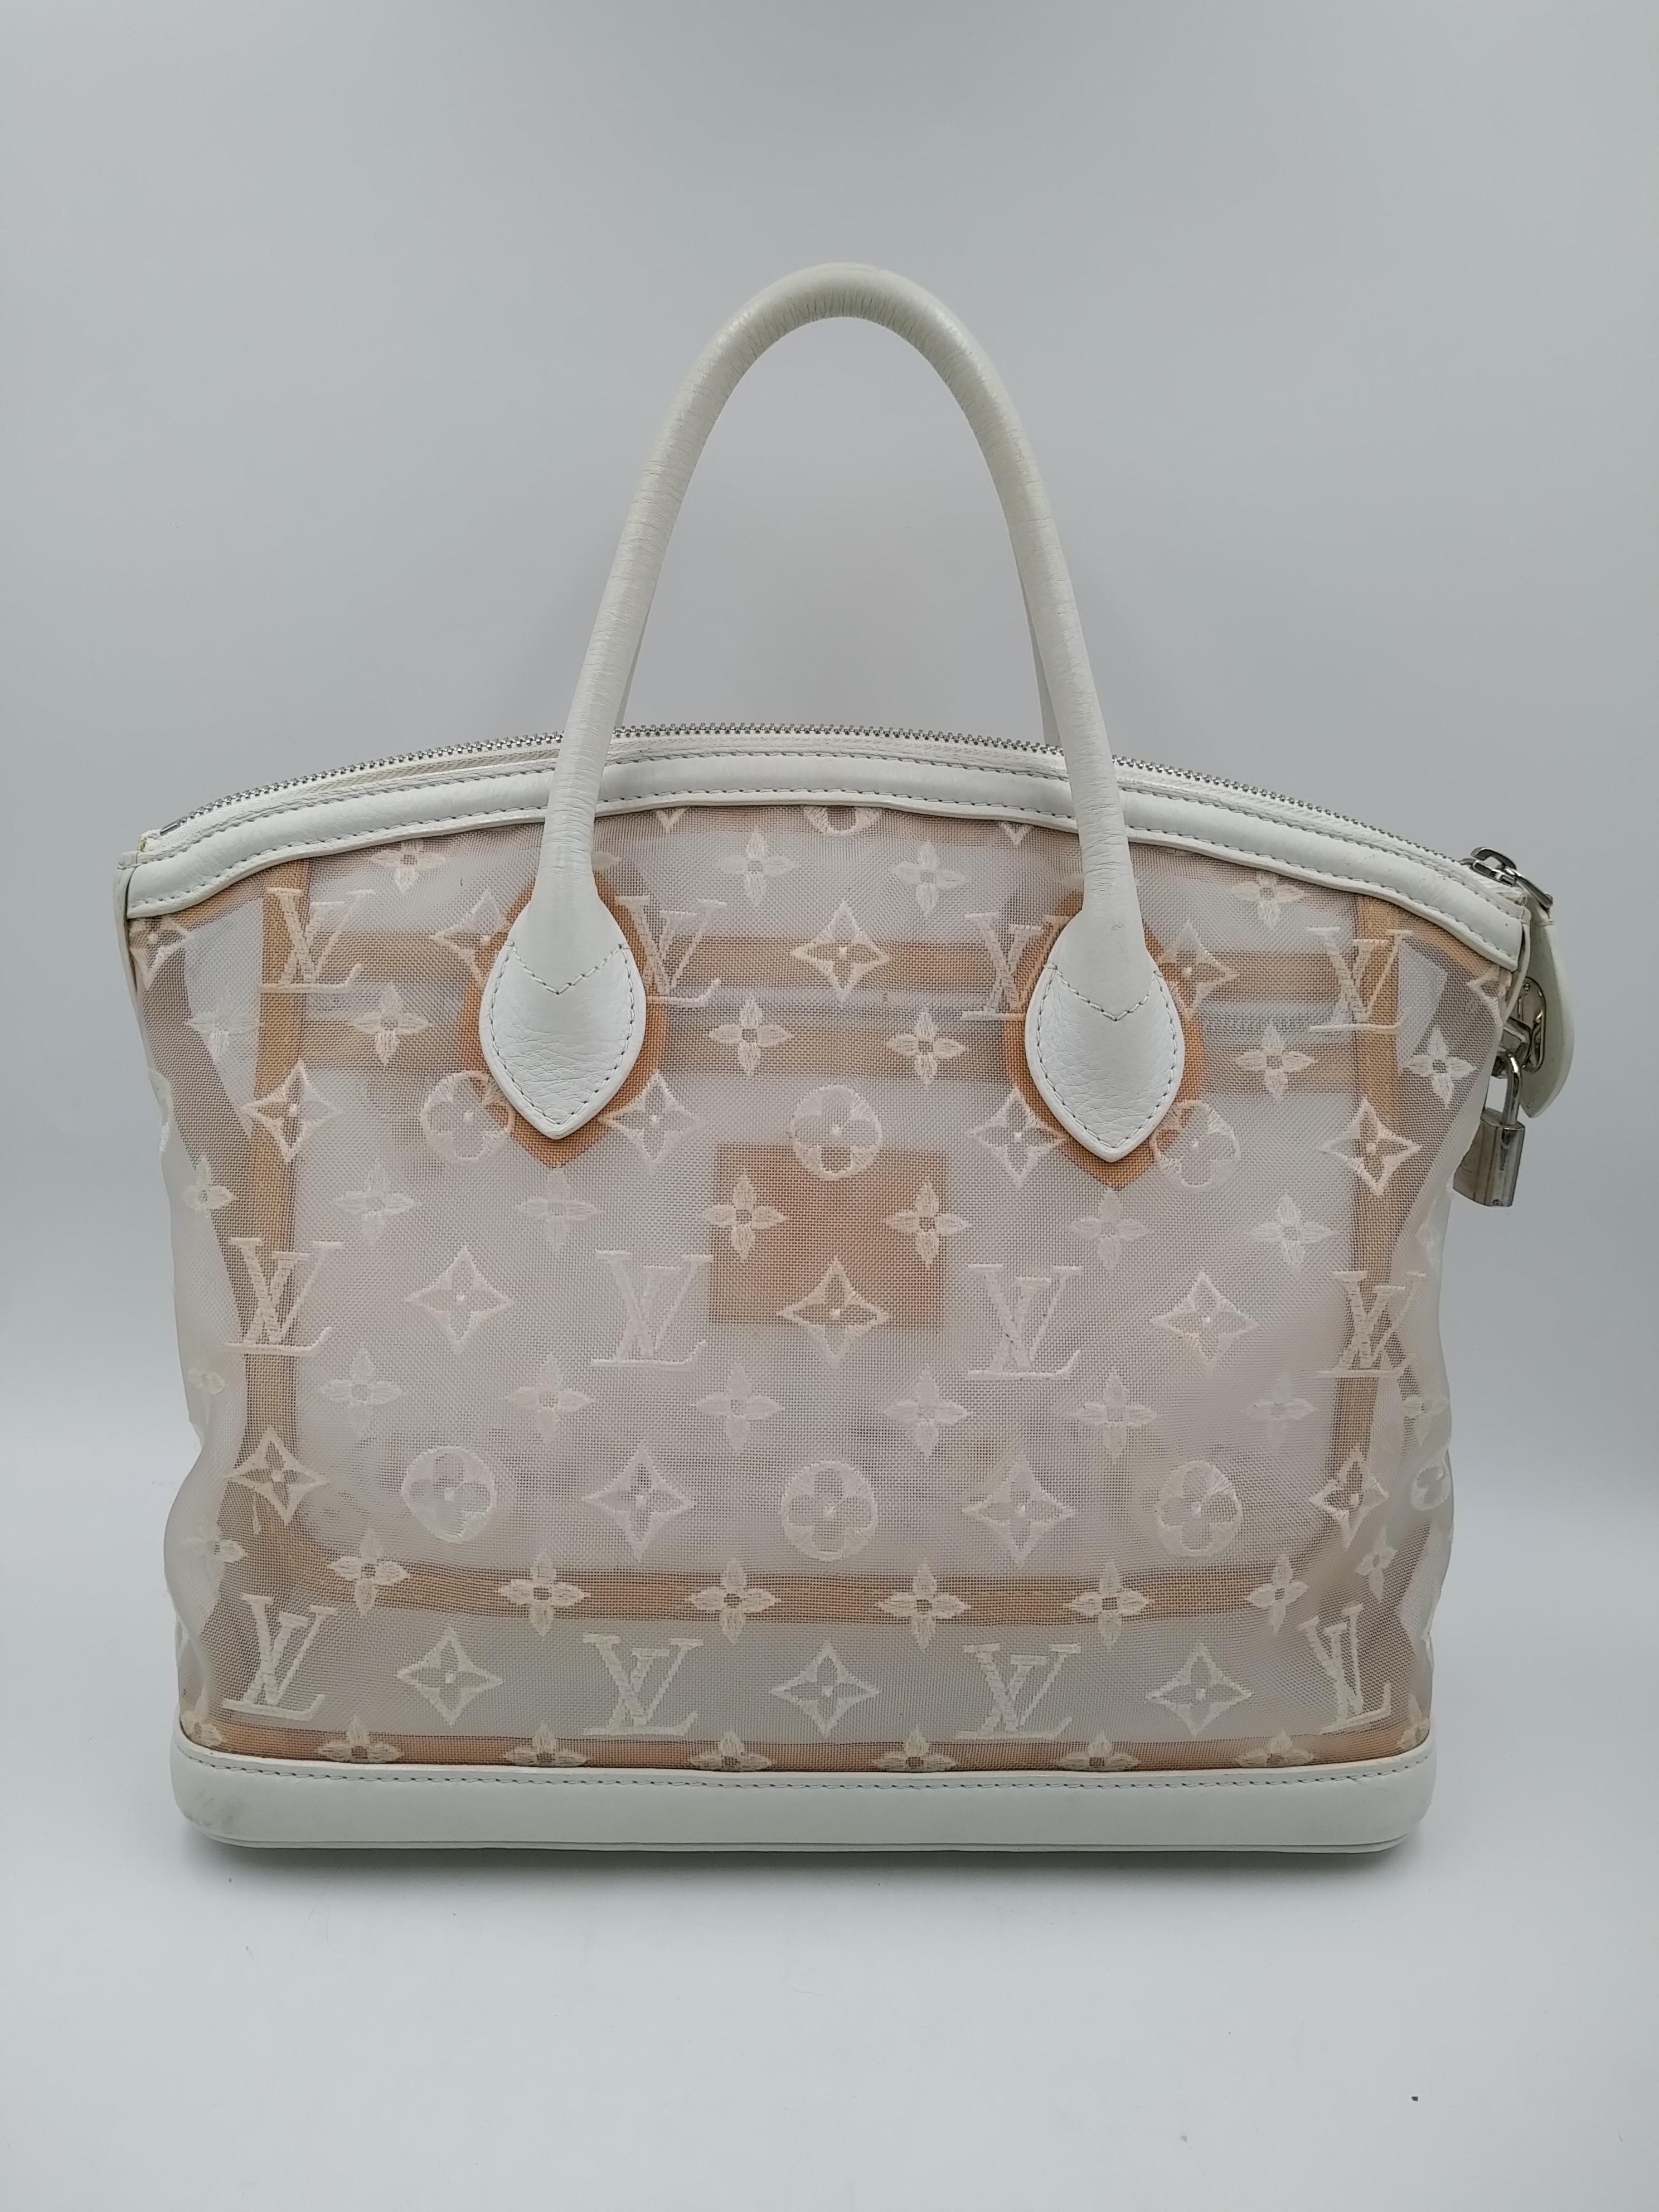 Louis Vuitton Limited Edition Monogram Transparence Lockit Bag, Marc Jacobs created the Spring/Summer 2012 Transparence line to exude sweetness and lightness.
- 100% Authentic Louis Vuitton
- Monogram embroidered sheer nylon with white calfskin